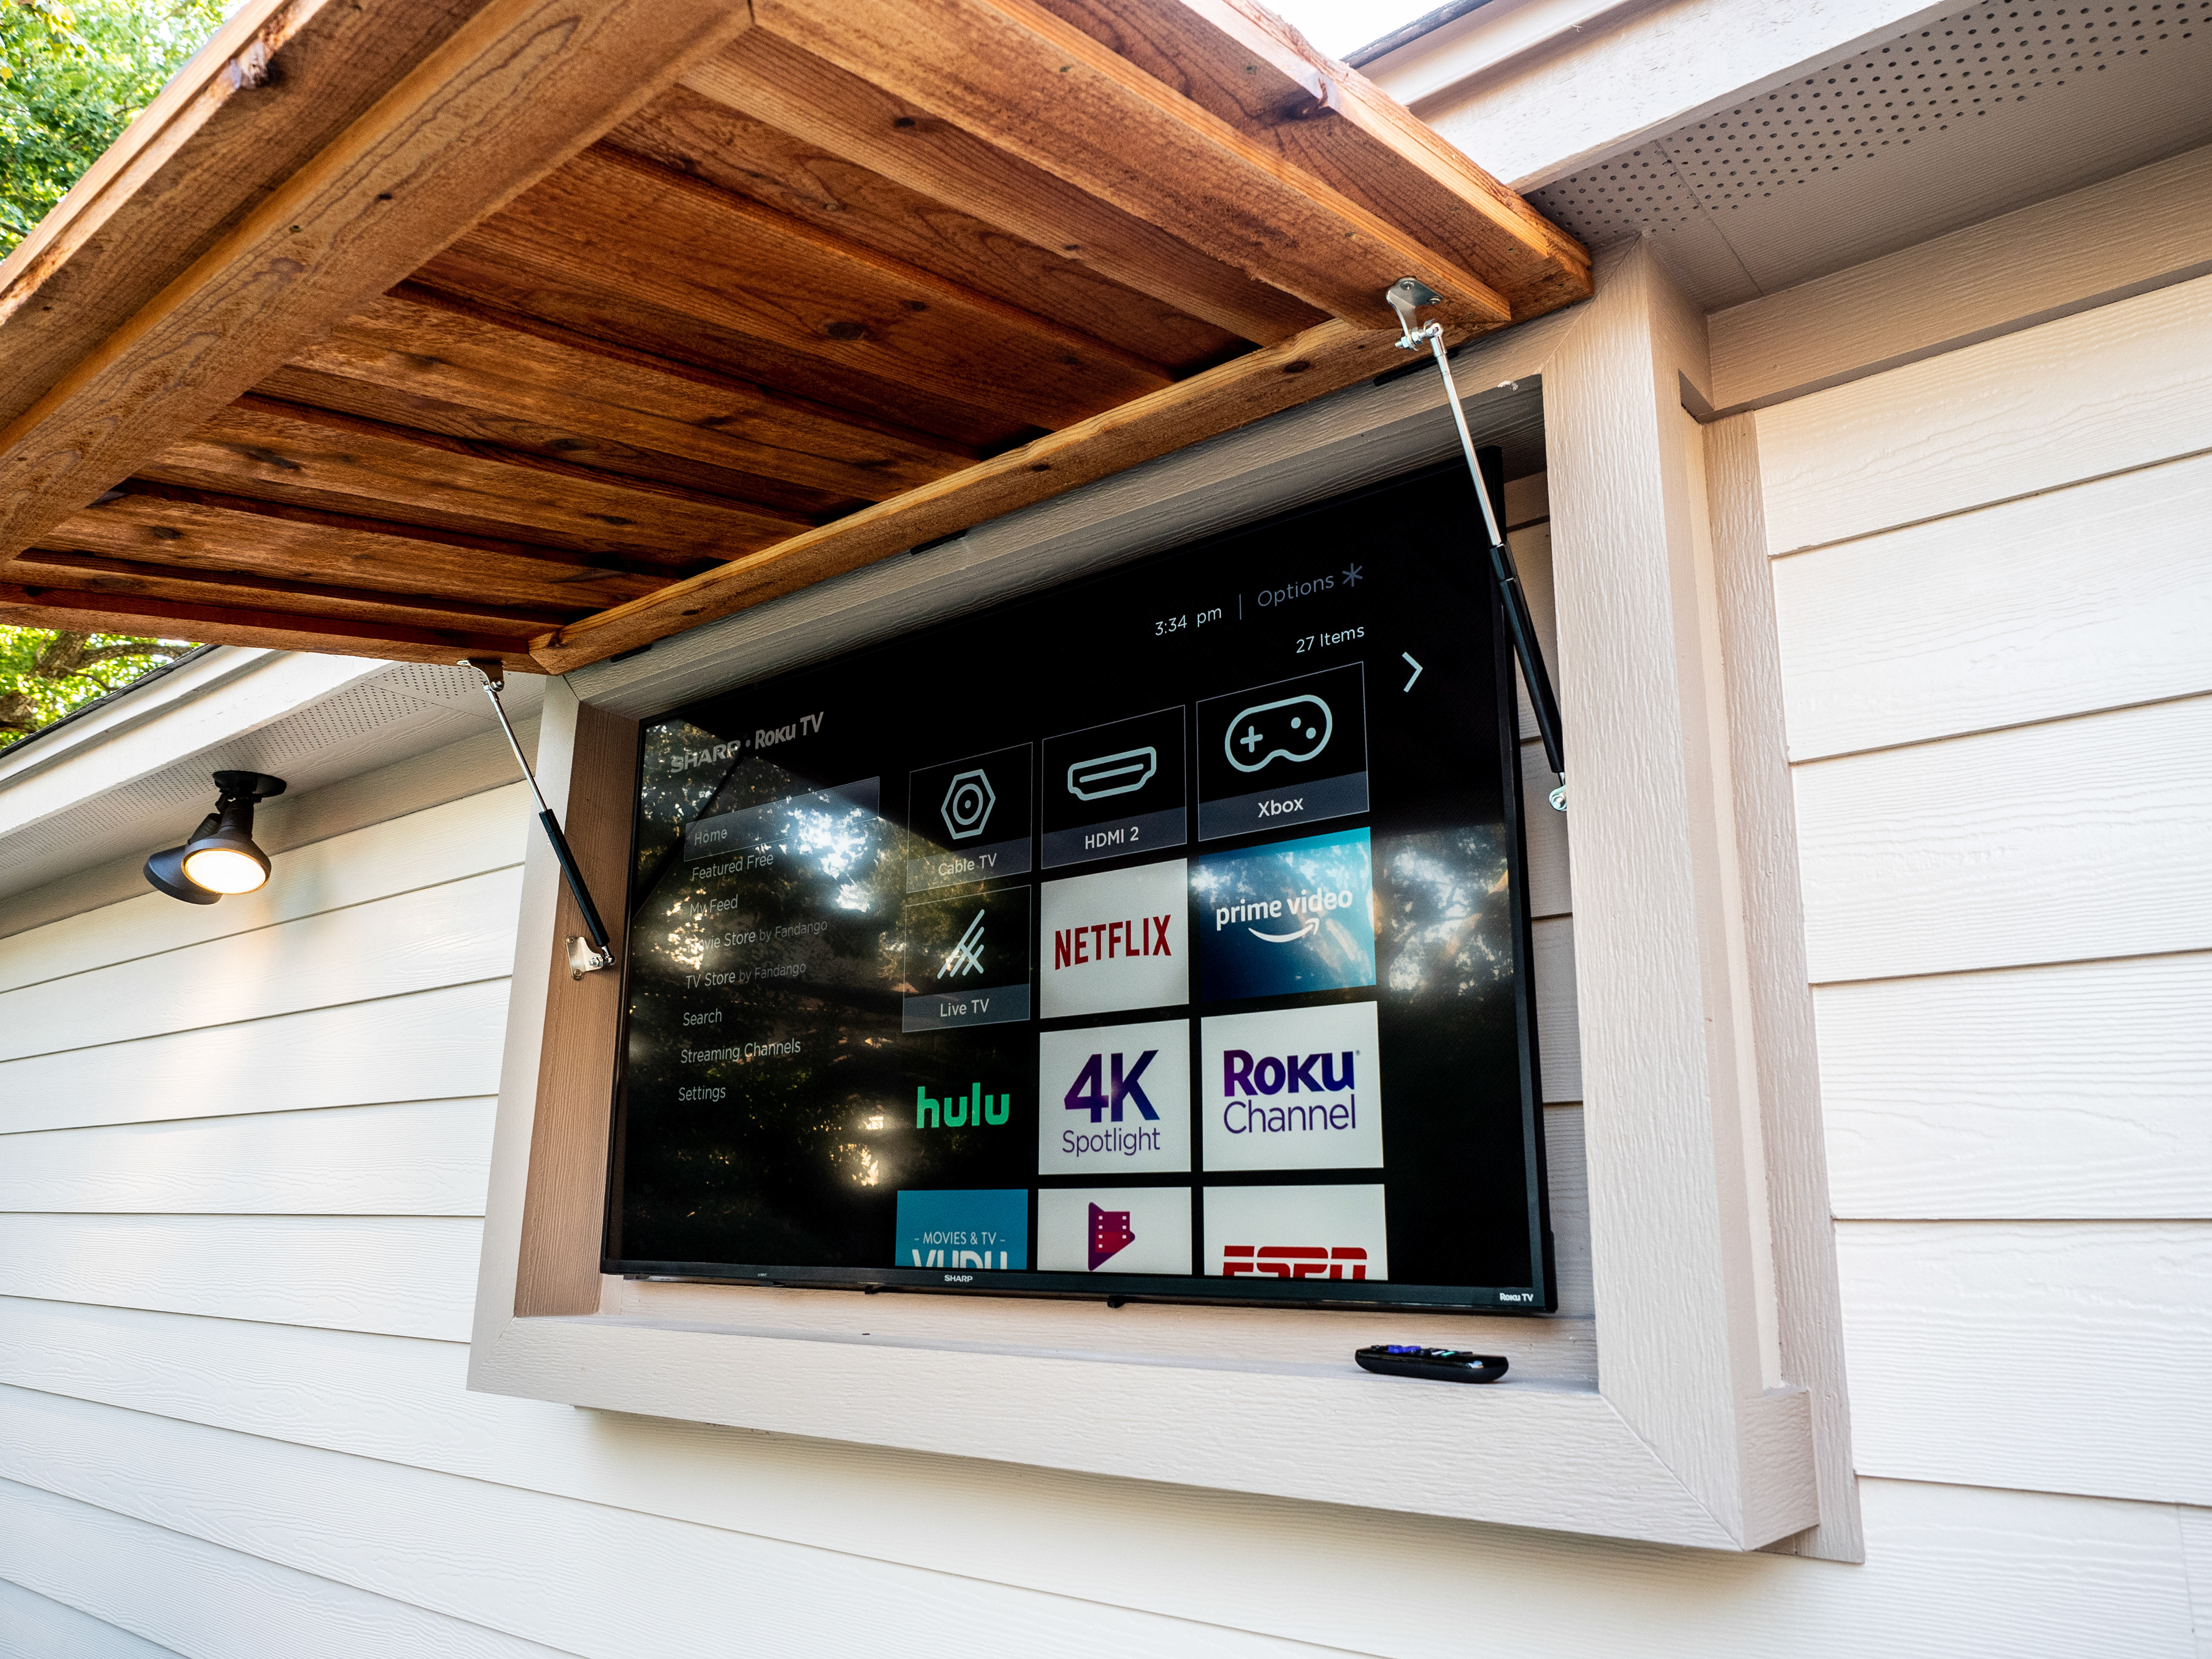 Outdoor Tv Cabinet 55in, How To Build A Cabinet For An Outdoor Tv